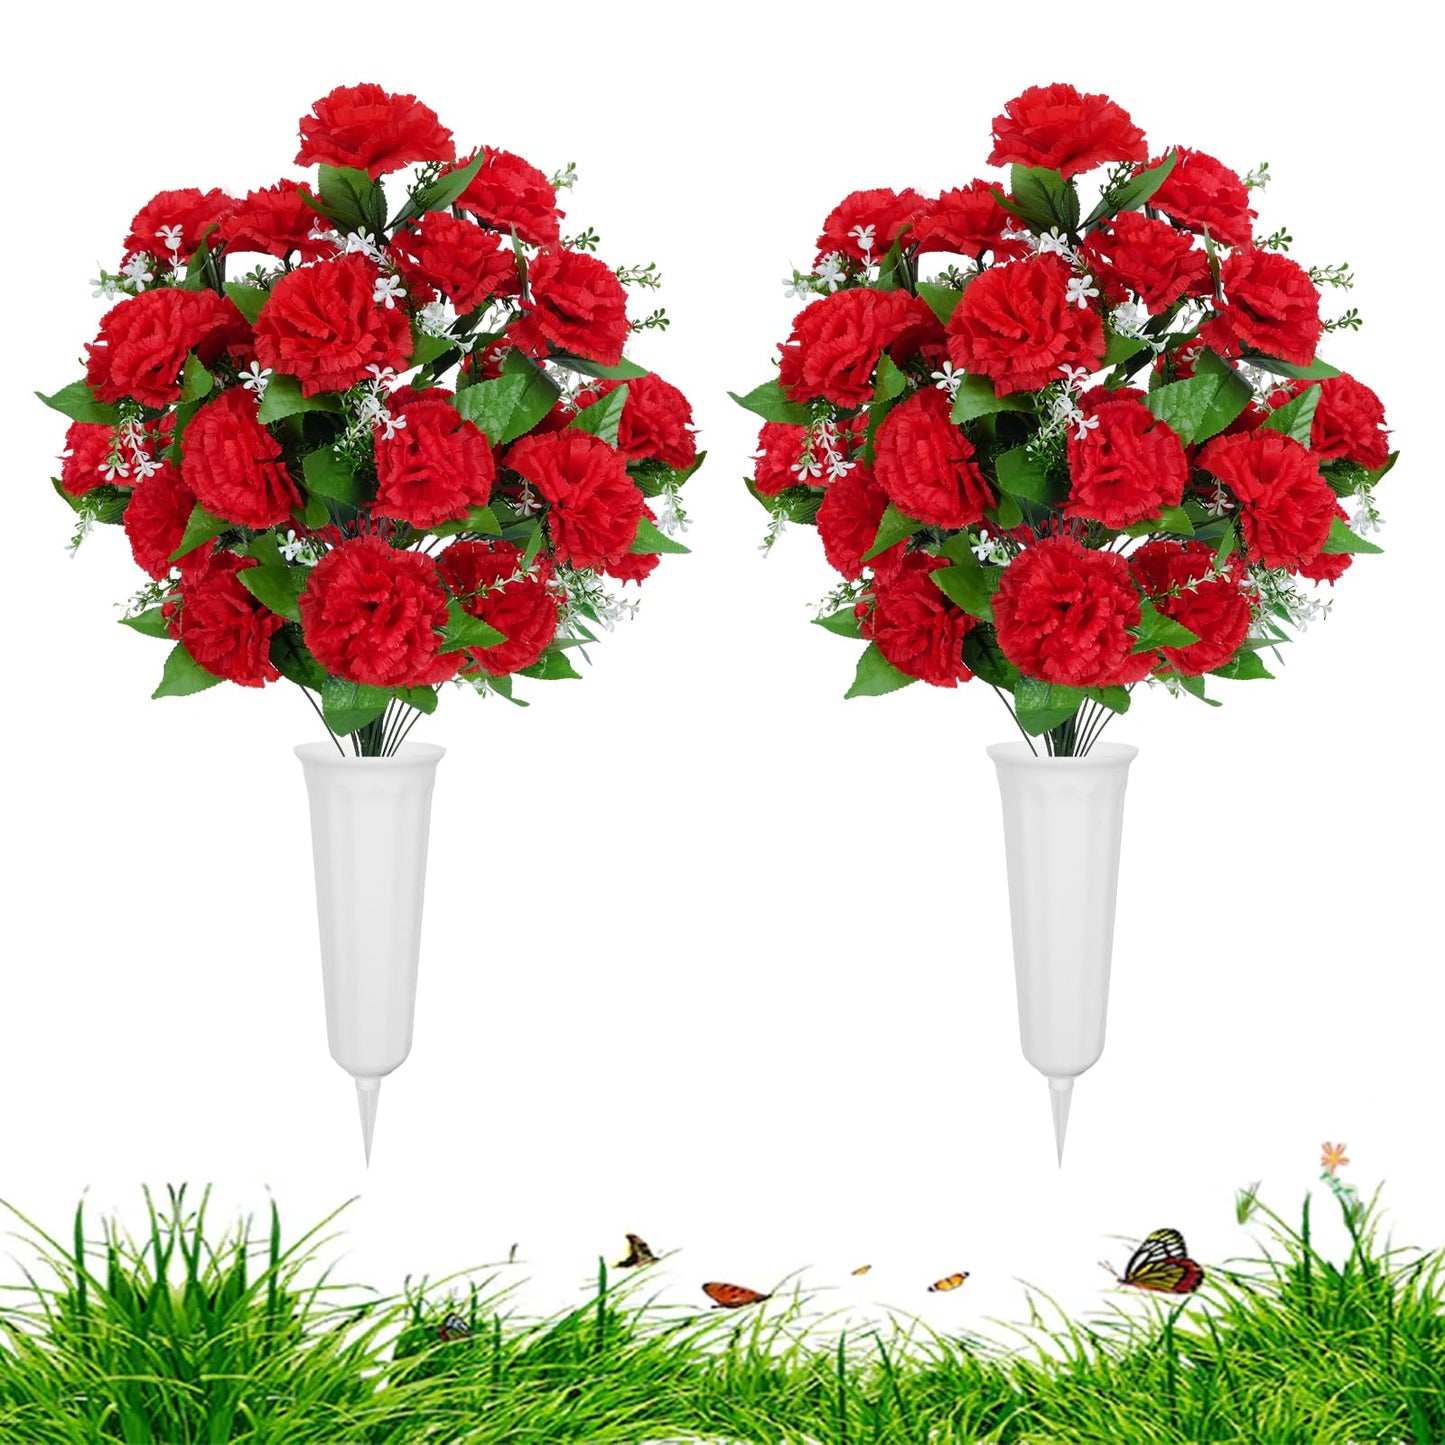 XHXSTORE 2 Sets Artificial Cemetery Flowers for Grave 48 Heads Red Fake Carnations Silk Memorial Flowers with Vase Graveyard Flowers for Outdoor Cemetery Arrangement Headstones Decor